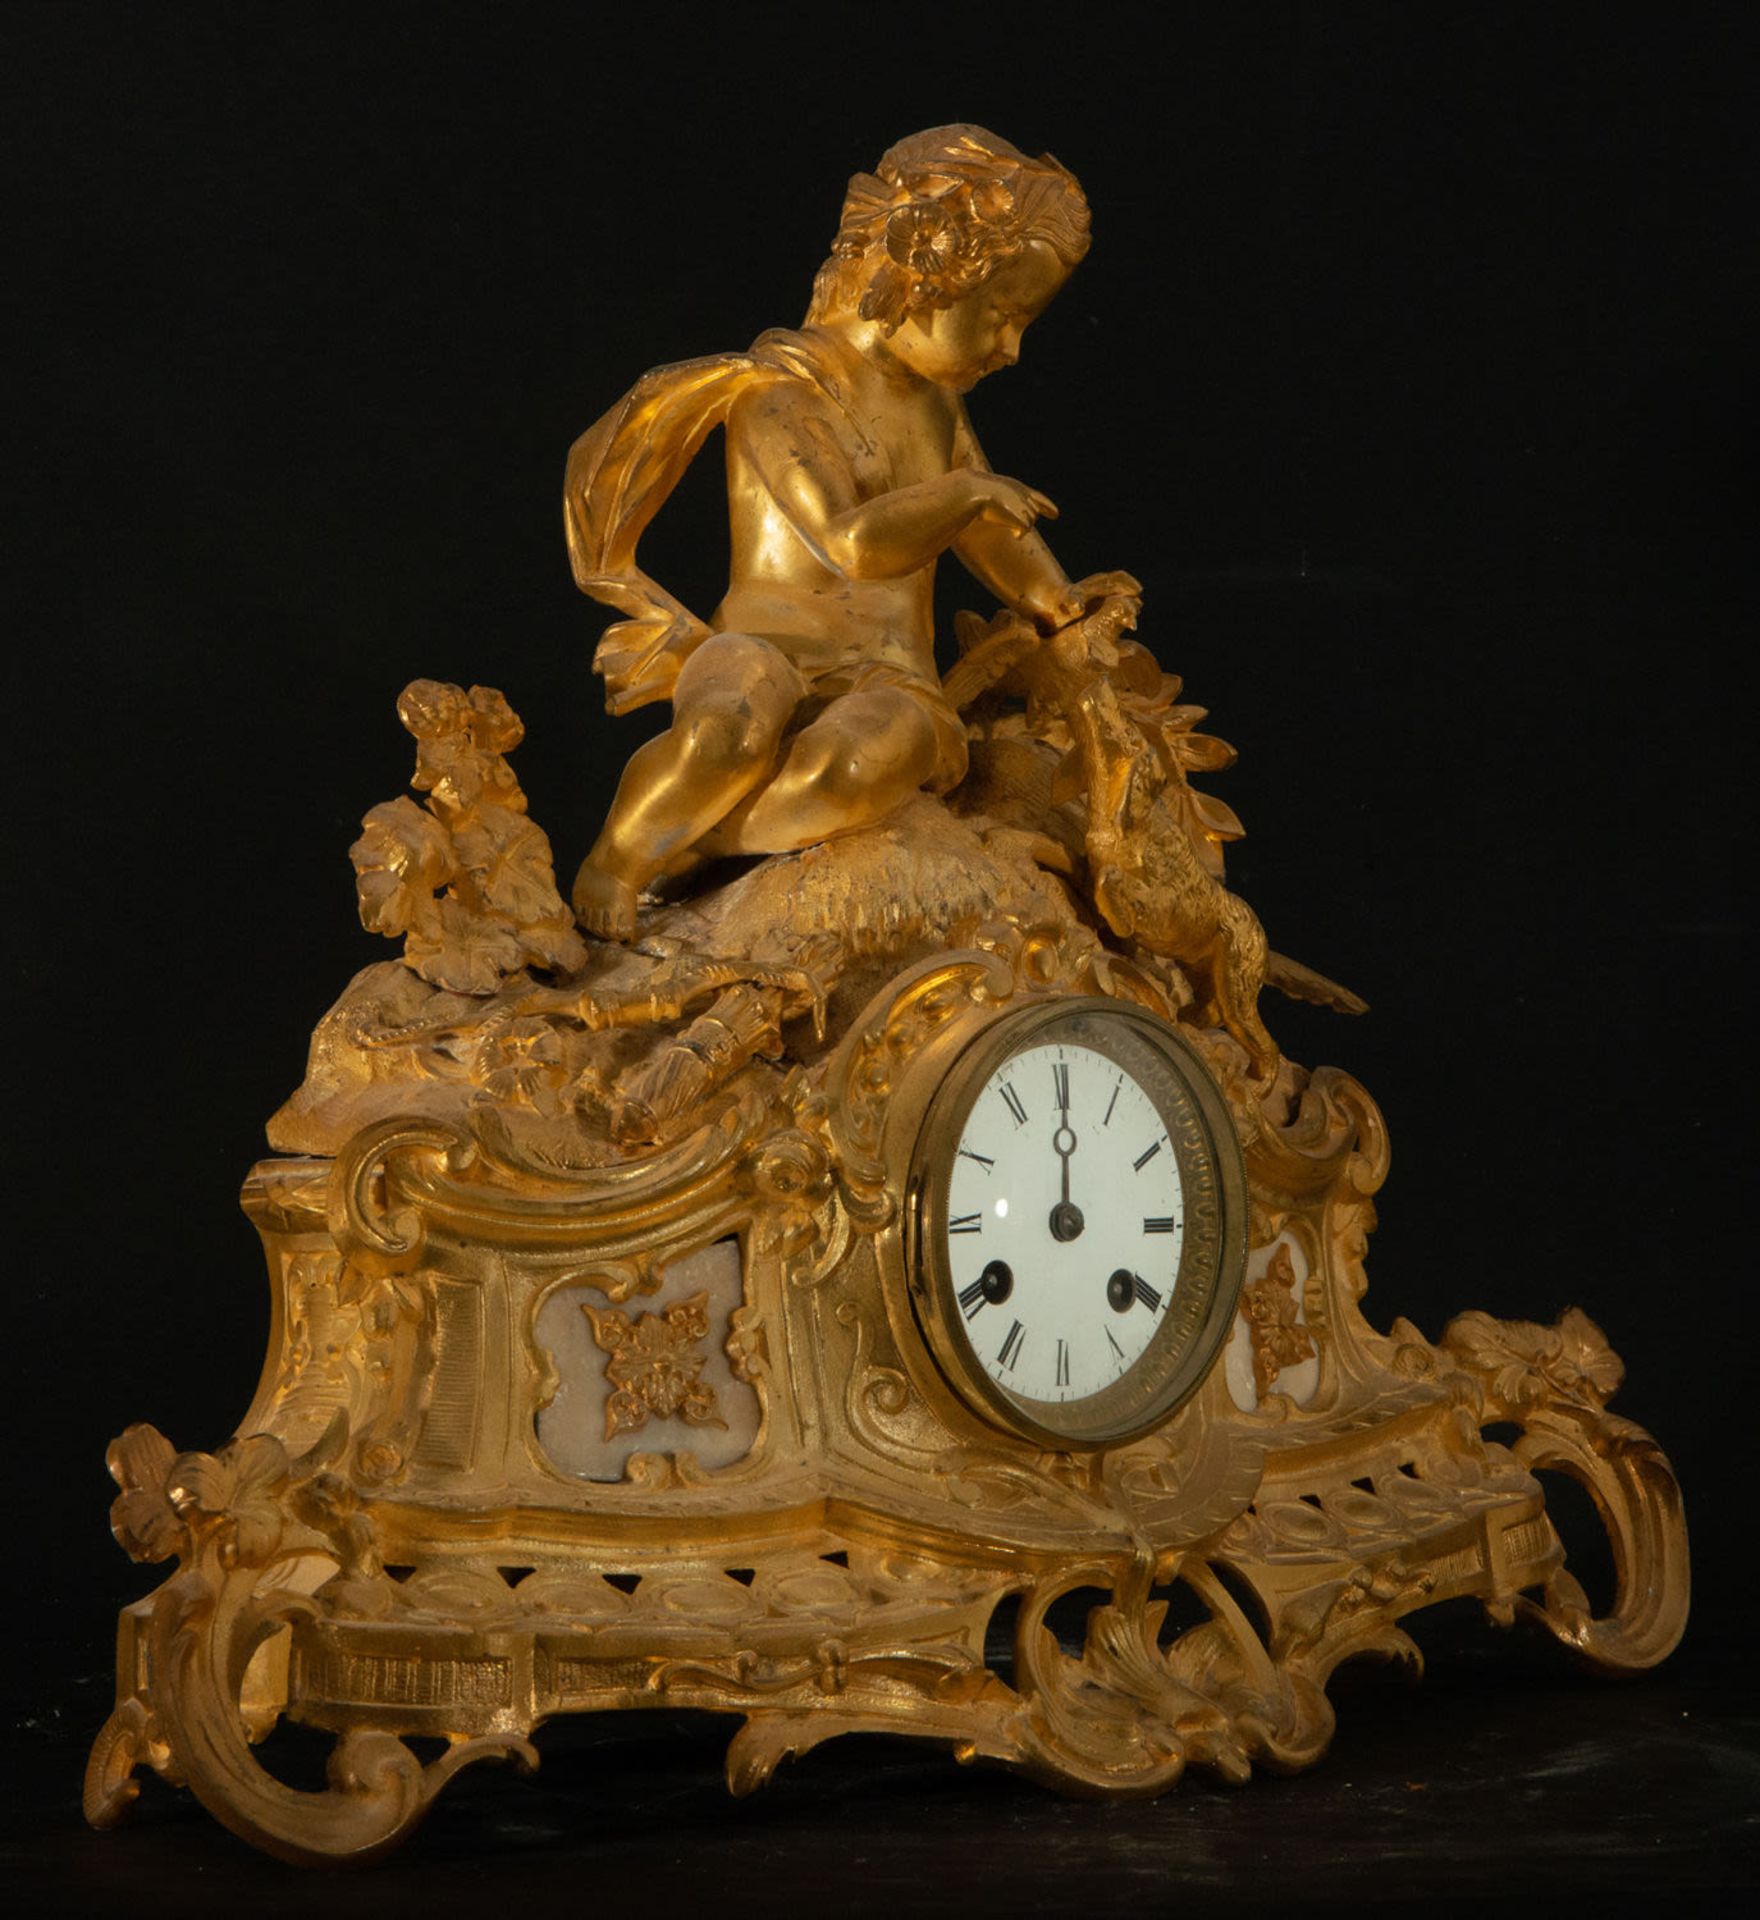 French Table Clock with Cherub, 19th century - Image 3 of 6